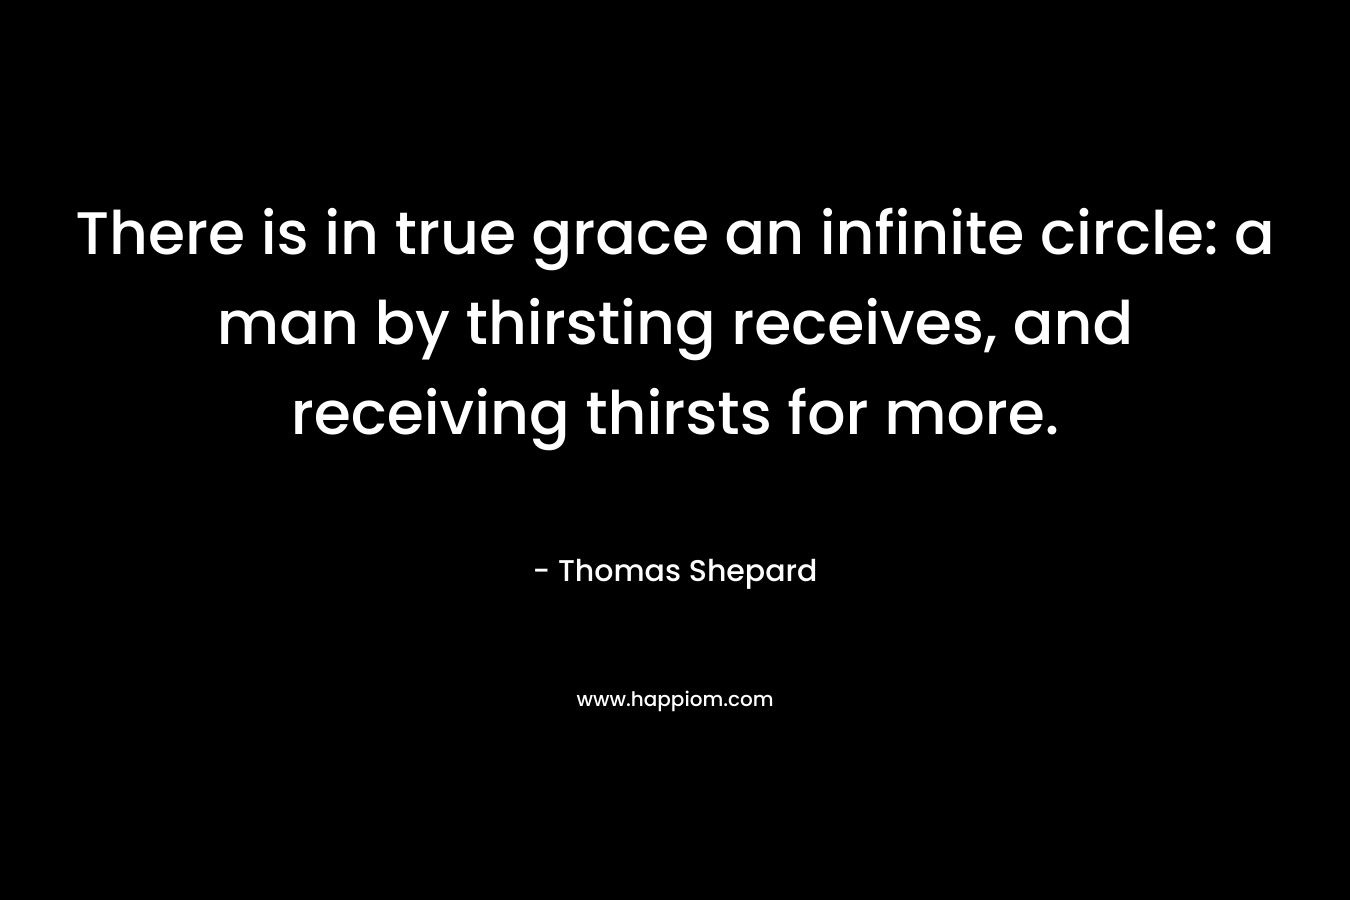 There is in true grace an infinite circle: a man by thirsting receives, and receiving thirsts for more. – Thomas Shepard